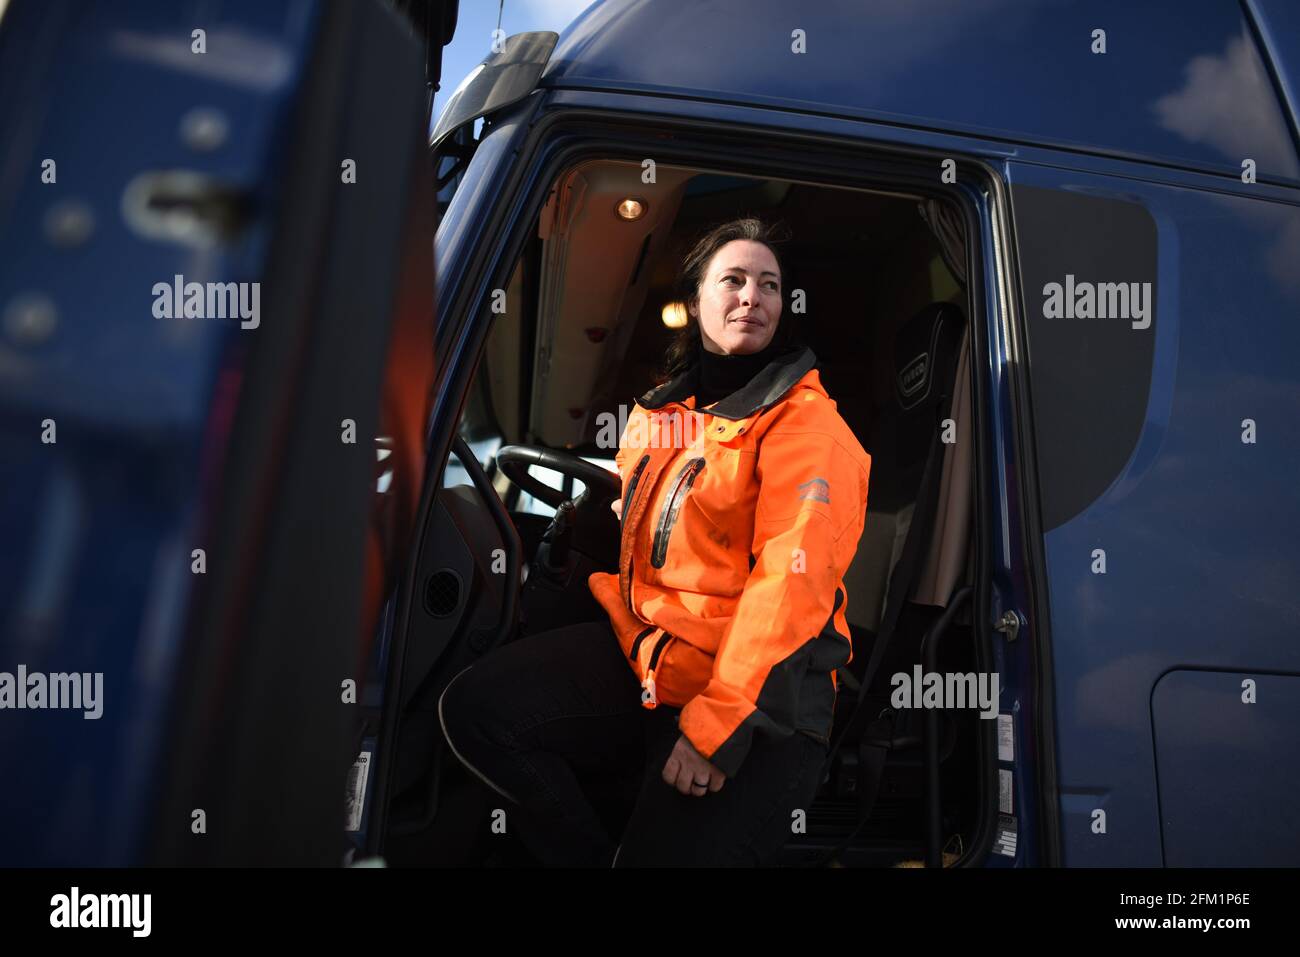 *** STRICTLY NO SALES TO FRENCH MEDIA OR PUBLISHERS - RIGHTS RESERVED ***February 18, 2021 - Cherbourg, France: Portrait of a French woman trucker, who said logistics at Cherbourg harbour had become chaotic following Brexit. Officials at the Normandy port of Cherbourg reported that their business tripled since Brexit led to a surge in direct traffic between the European Union and the island of Ireland. Freight ferries take 17 hours to cross the sea between France and Ireland. Stock Photo